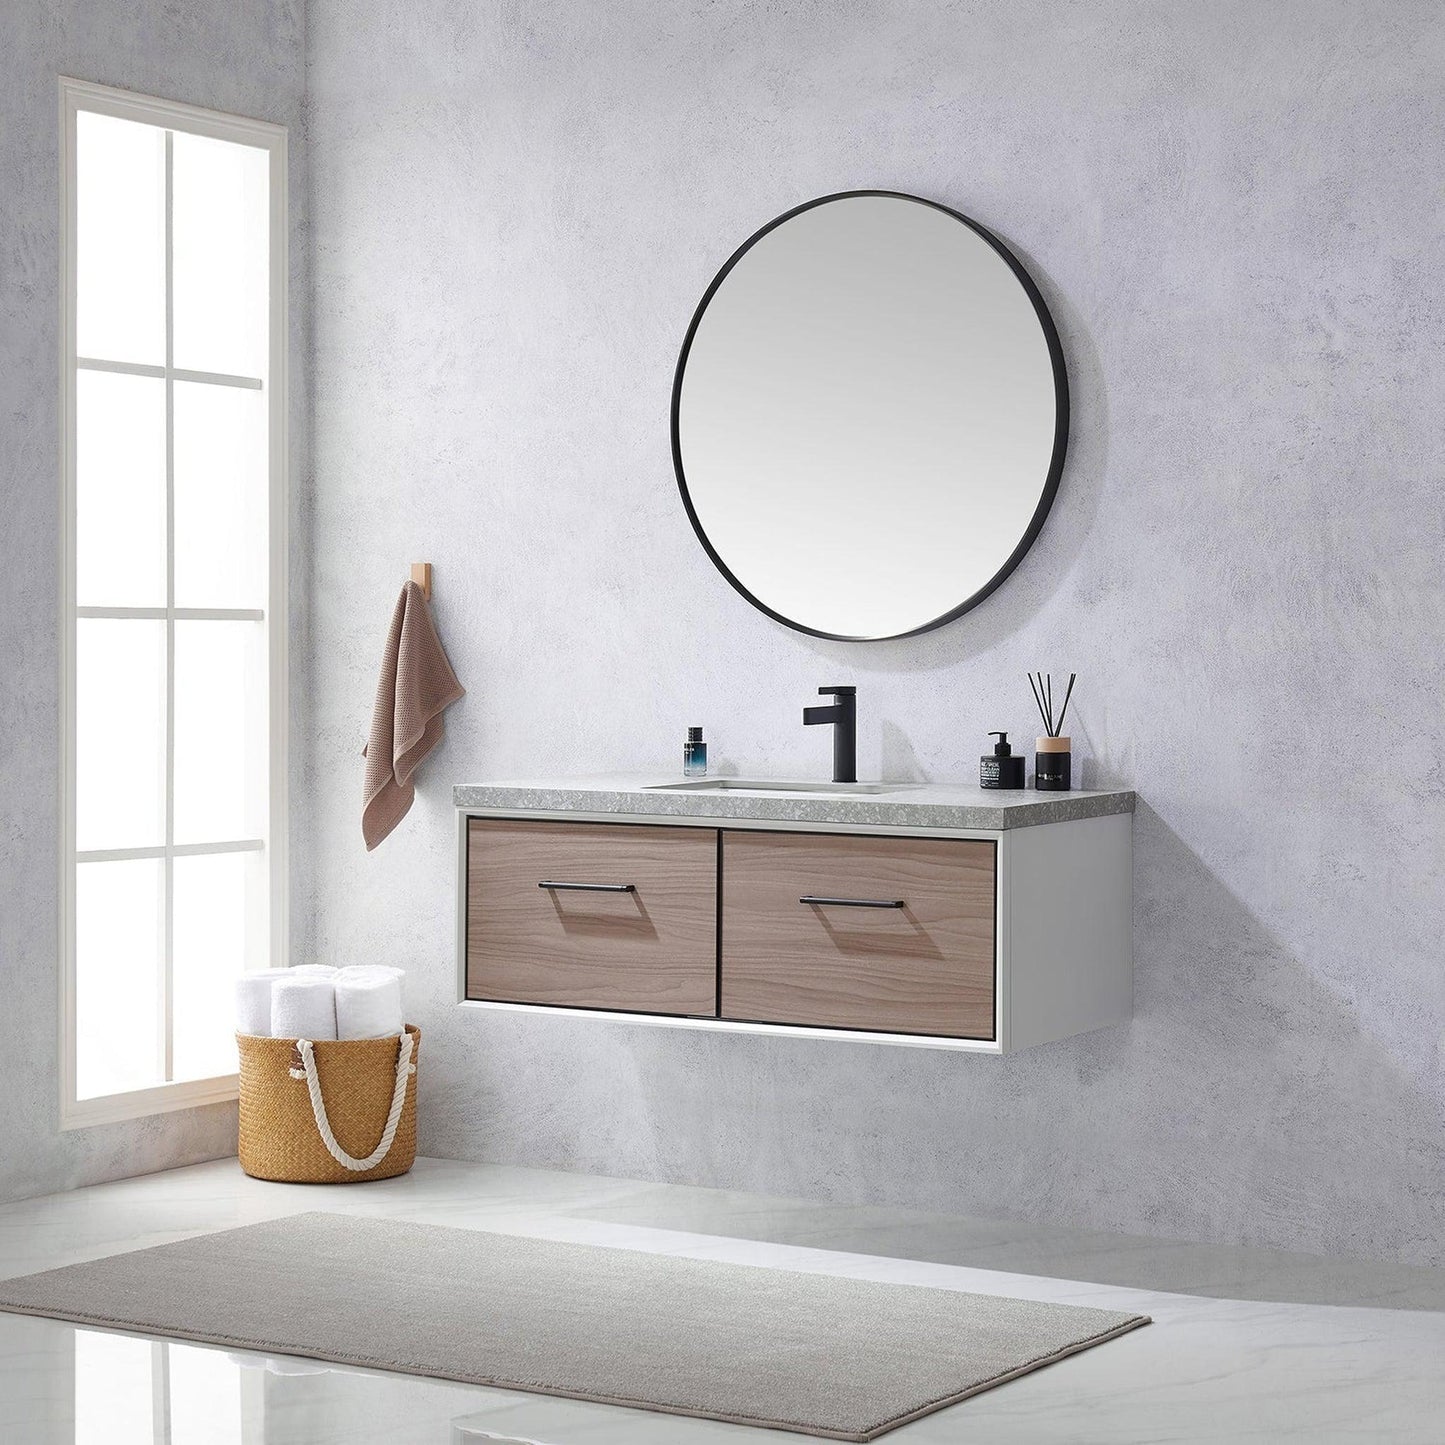 Vinnova Caparroso 48" Single Sink Floating Bathroom Vanity In Light Walnut And Matte Black Hardware Finish With Grey Sintered Stone Top And Mirror